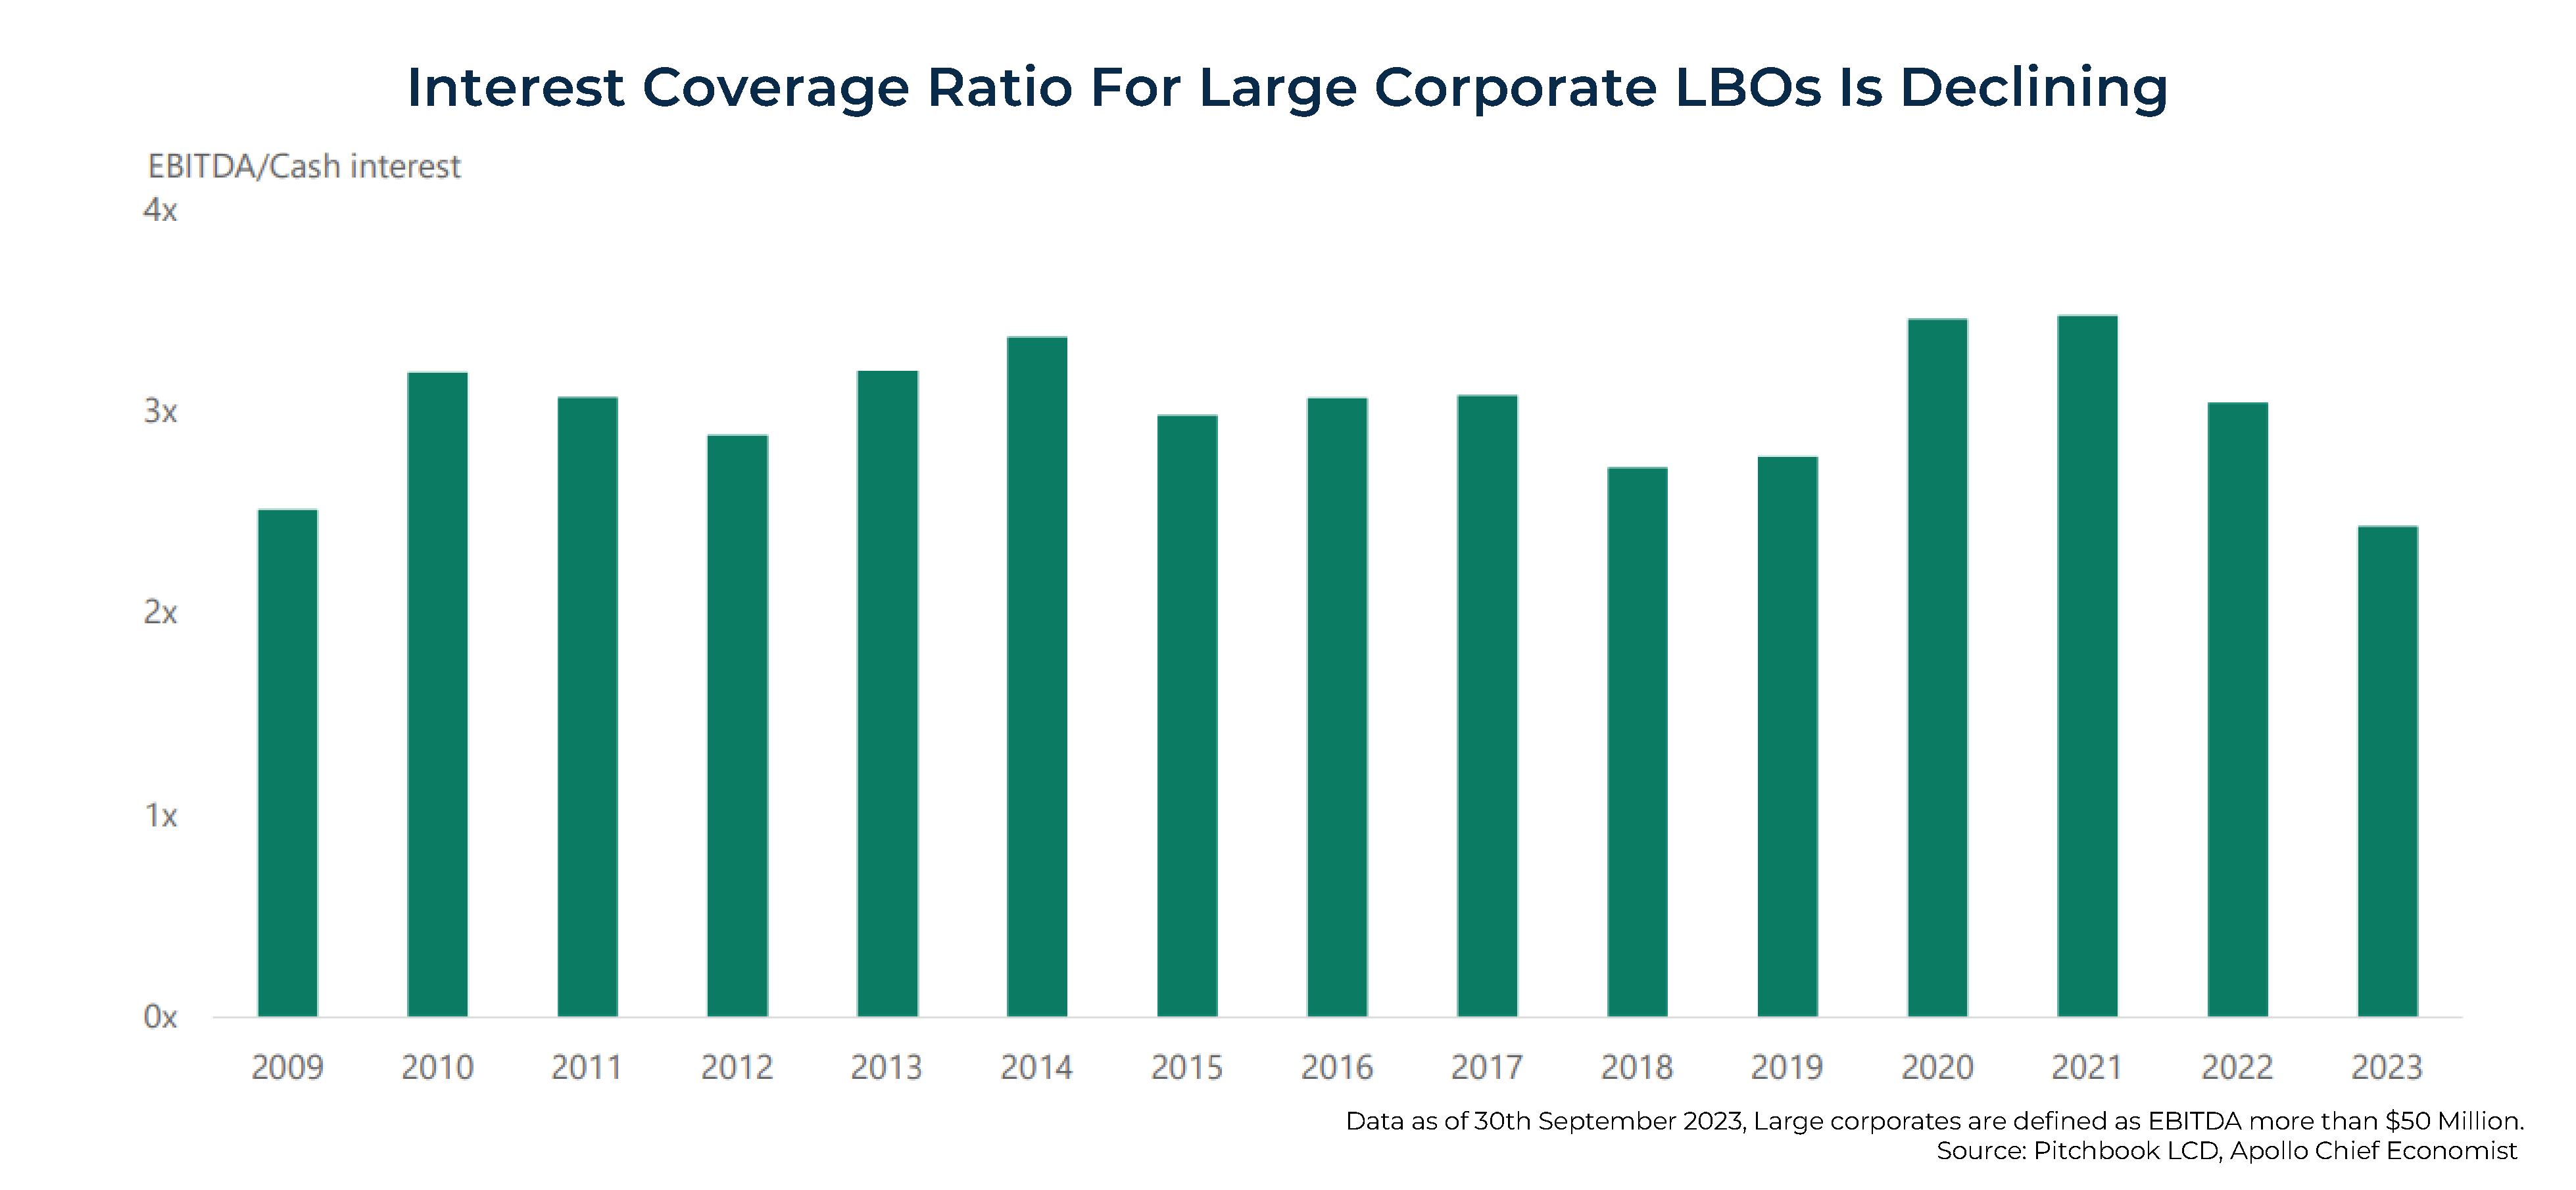 Interest Coverage Ratio For Large Corporate LBOs Is Declining